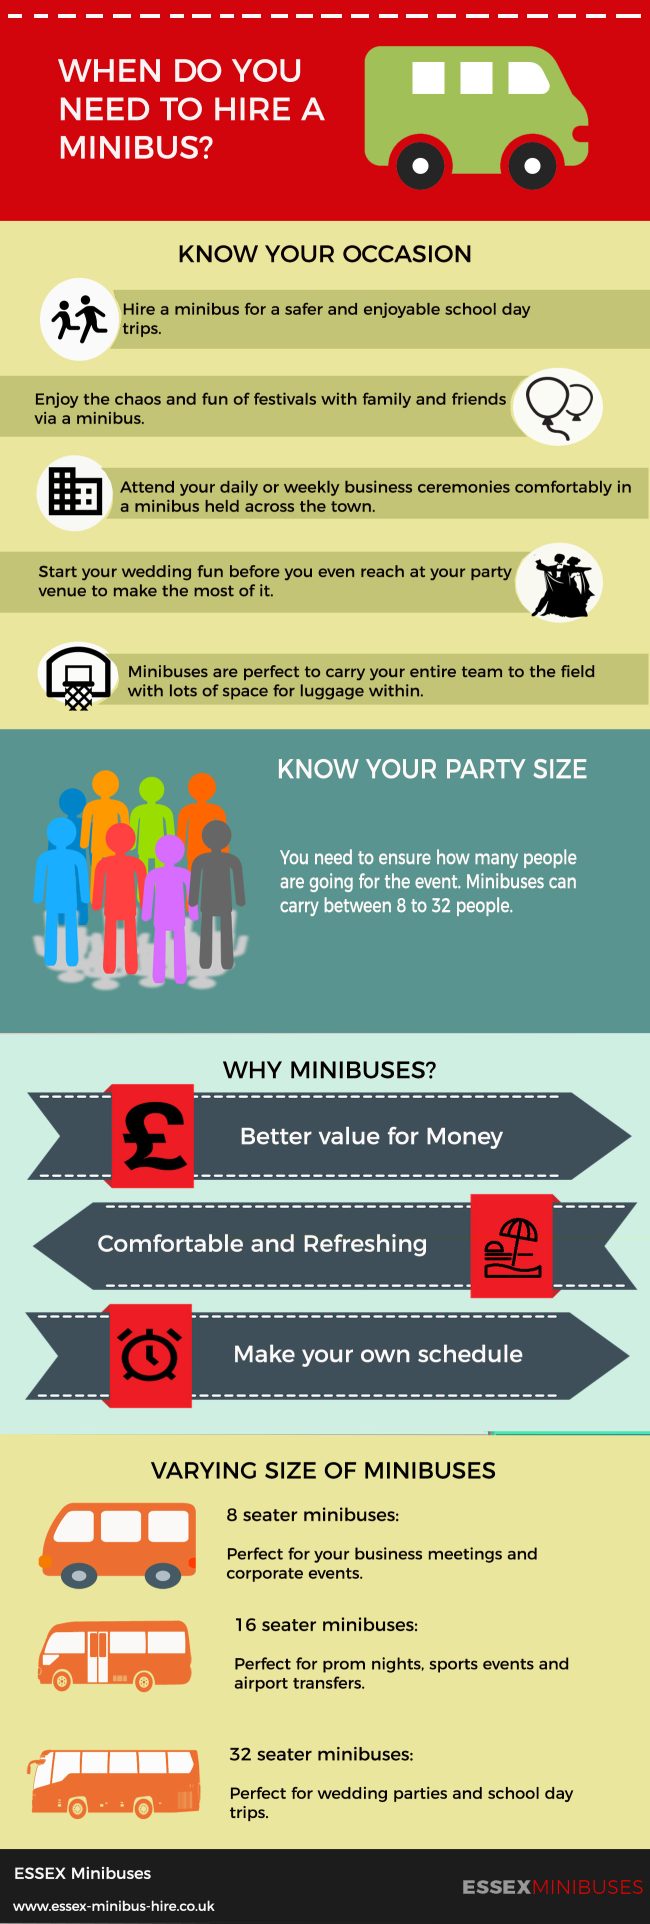 When Do You Need To Hire a Minibus?